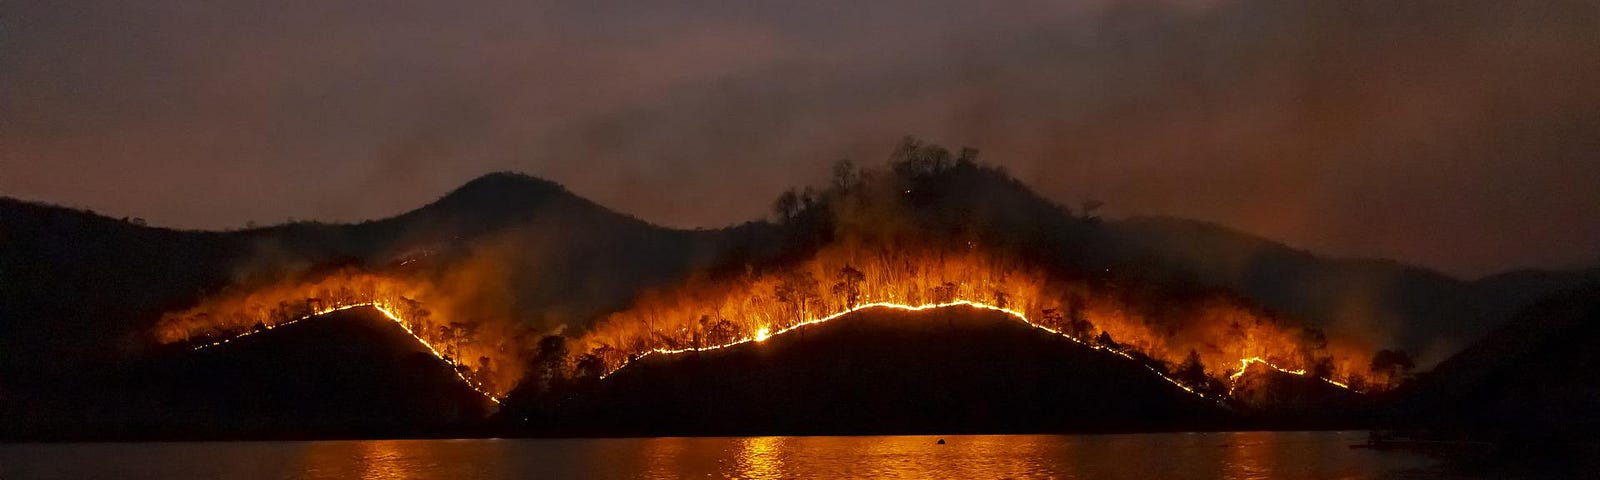 A lake in the foreground reflects the light from a nighttime forest fire on a distant mountain.